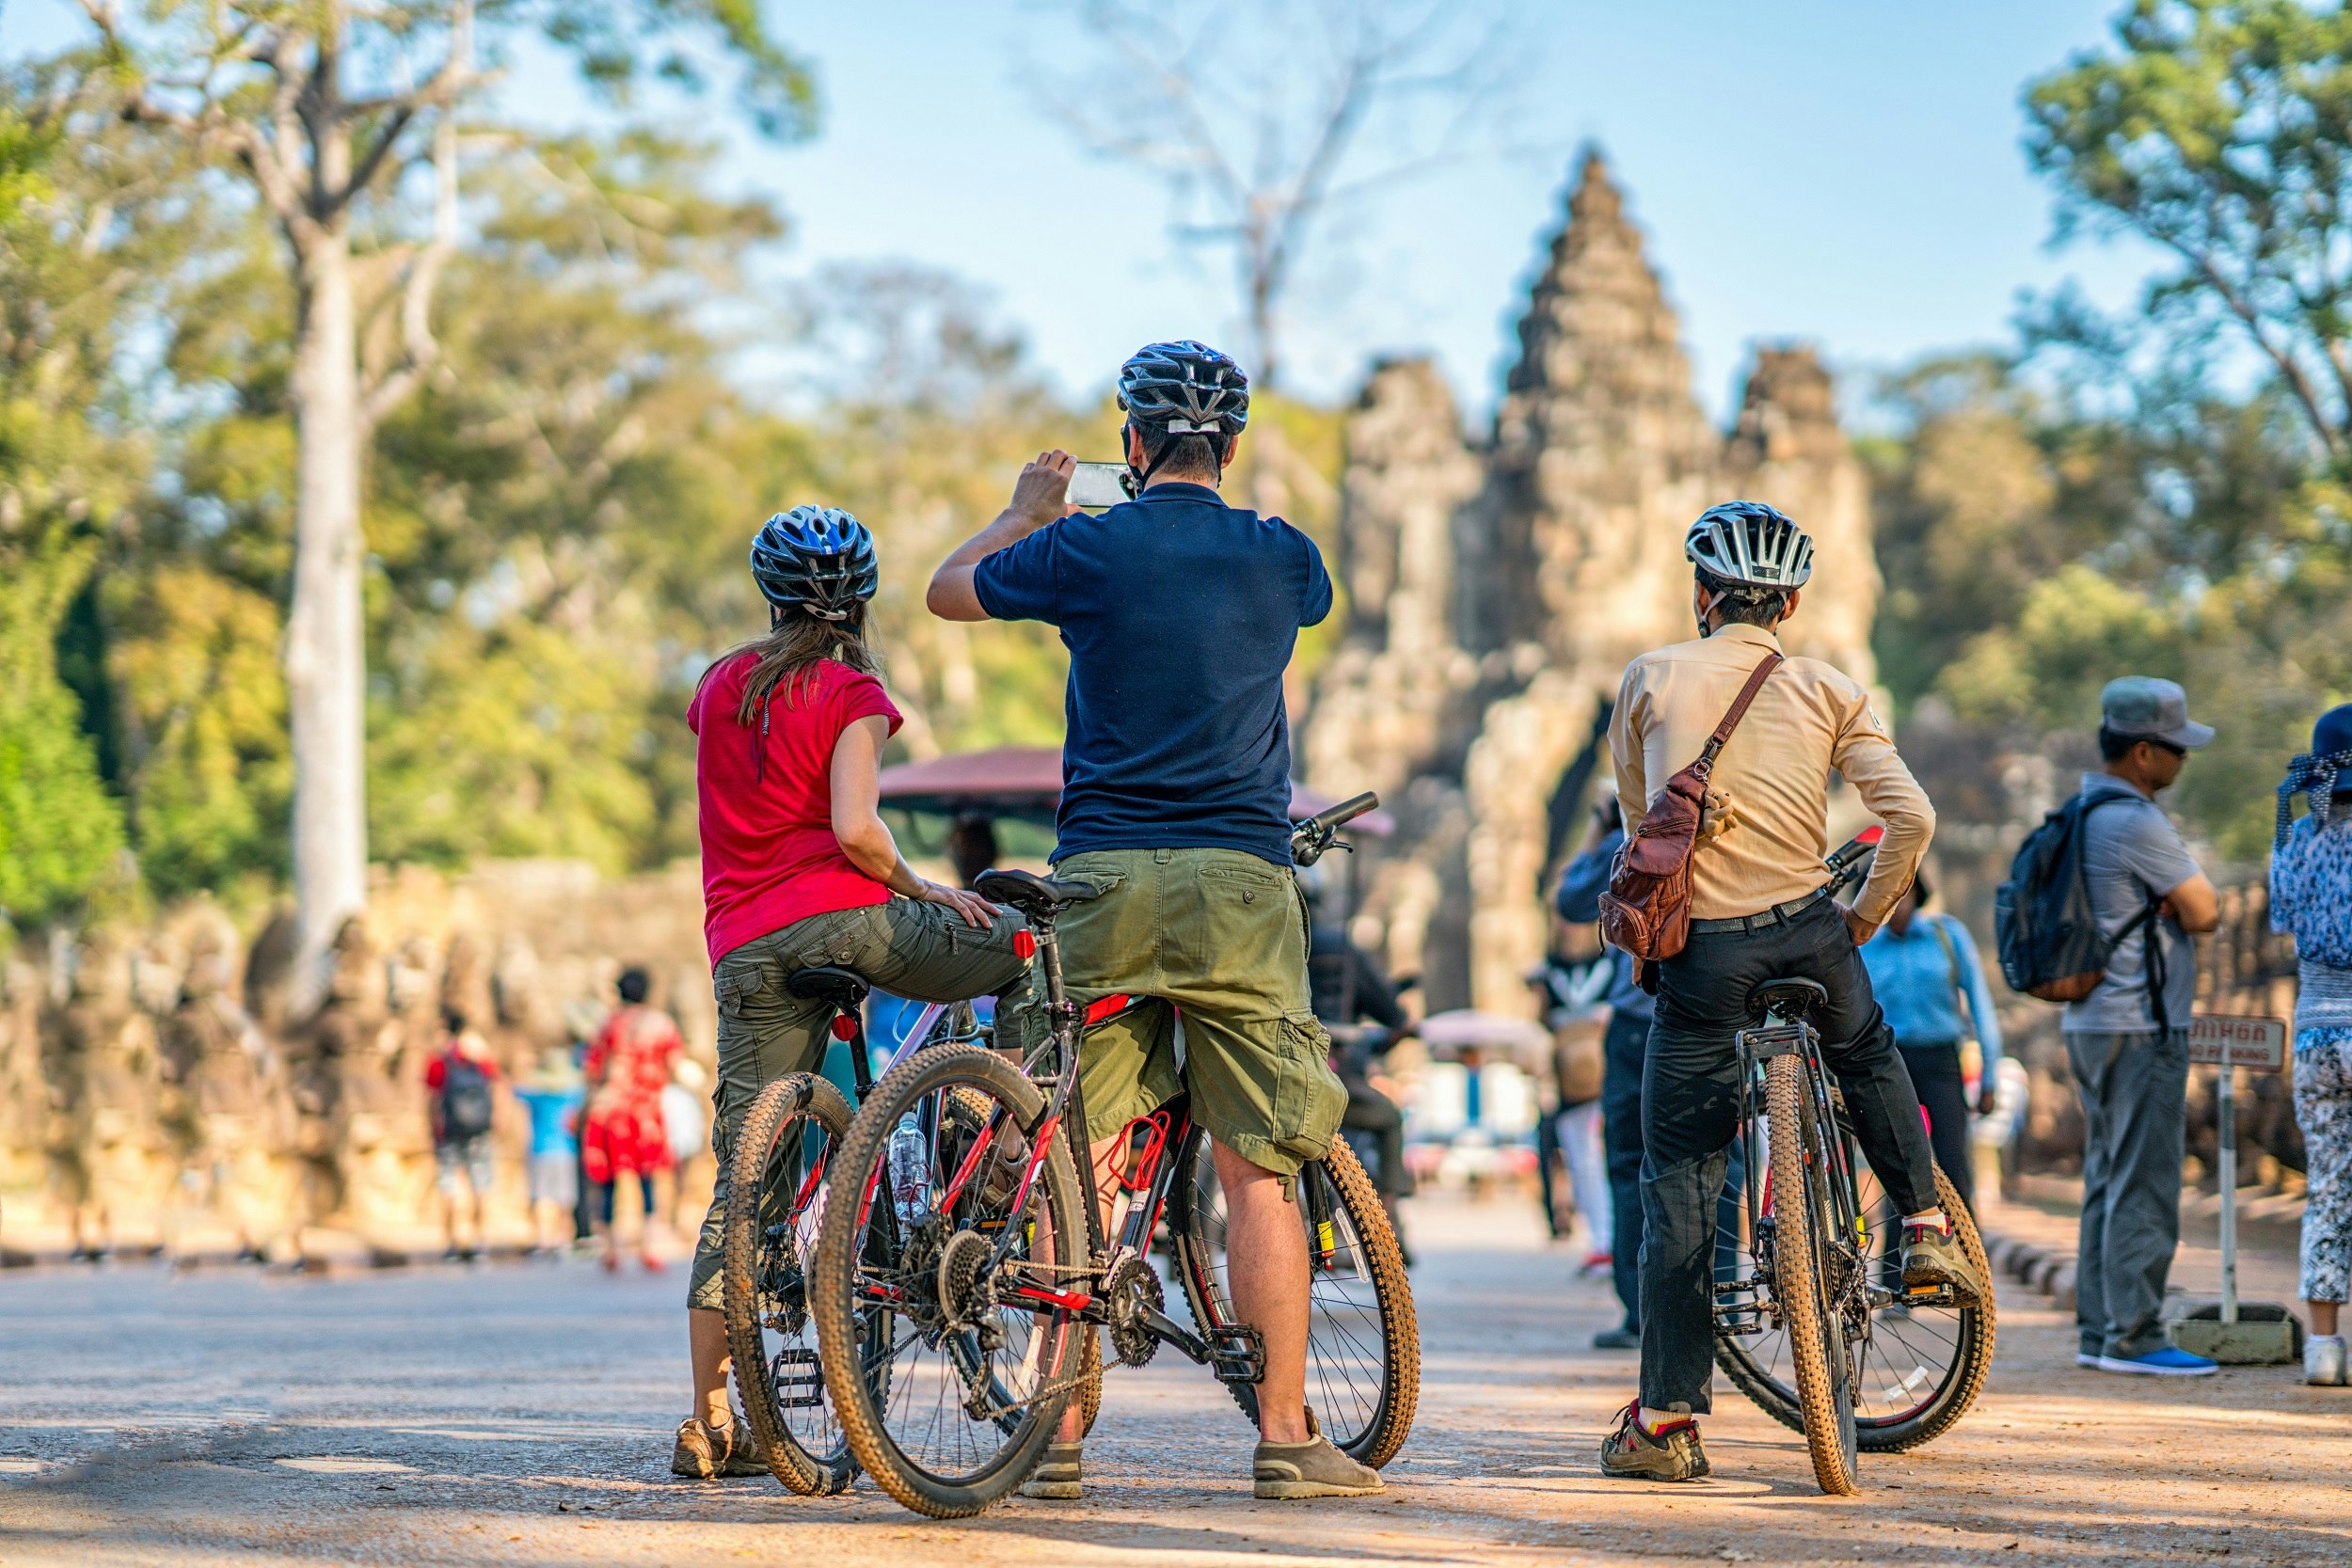 Three tourists, each wearing helmets, stand straddling mountain bikes; their backs are to the camera and they are facing some ancient ruins and crowds of people. The man in the middle is using his phone to take a picture.